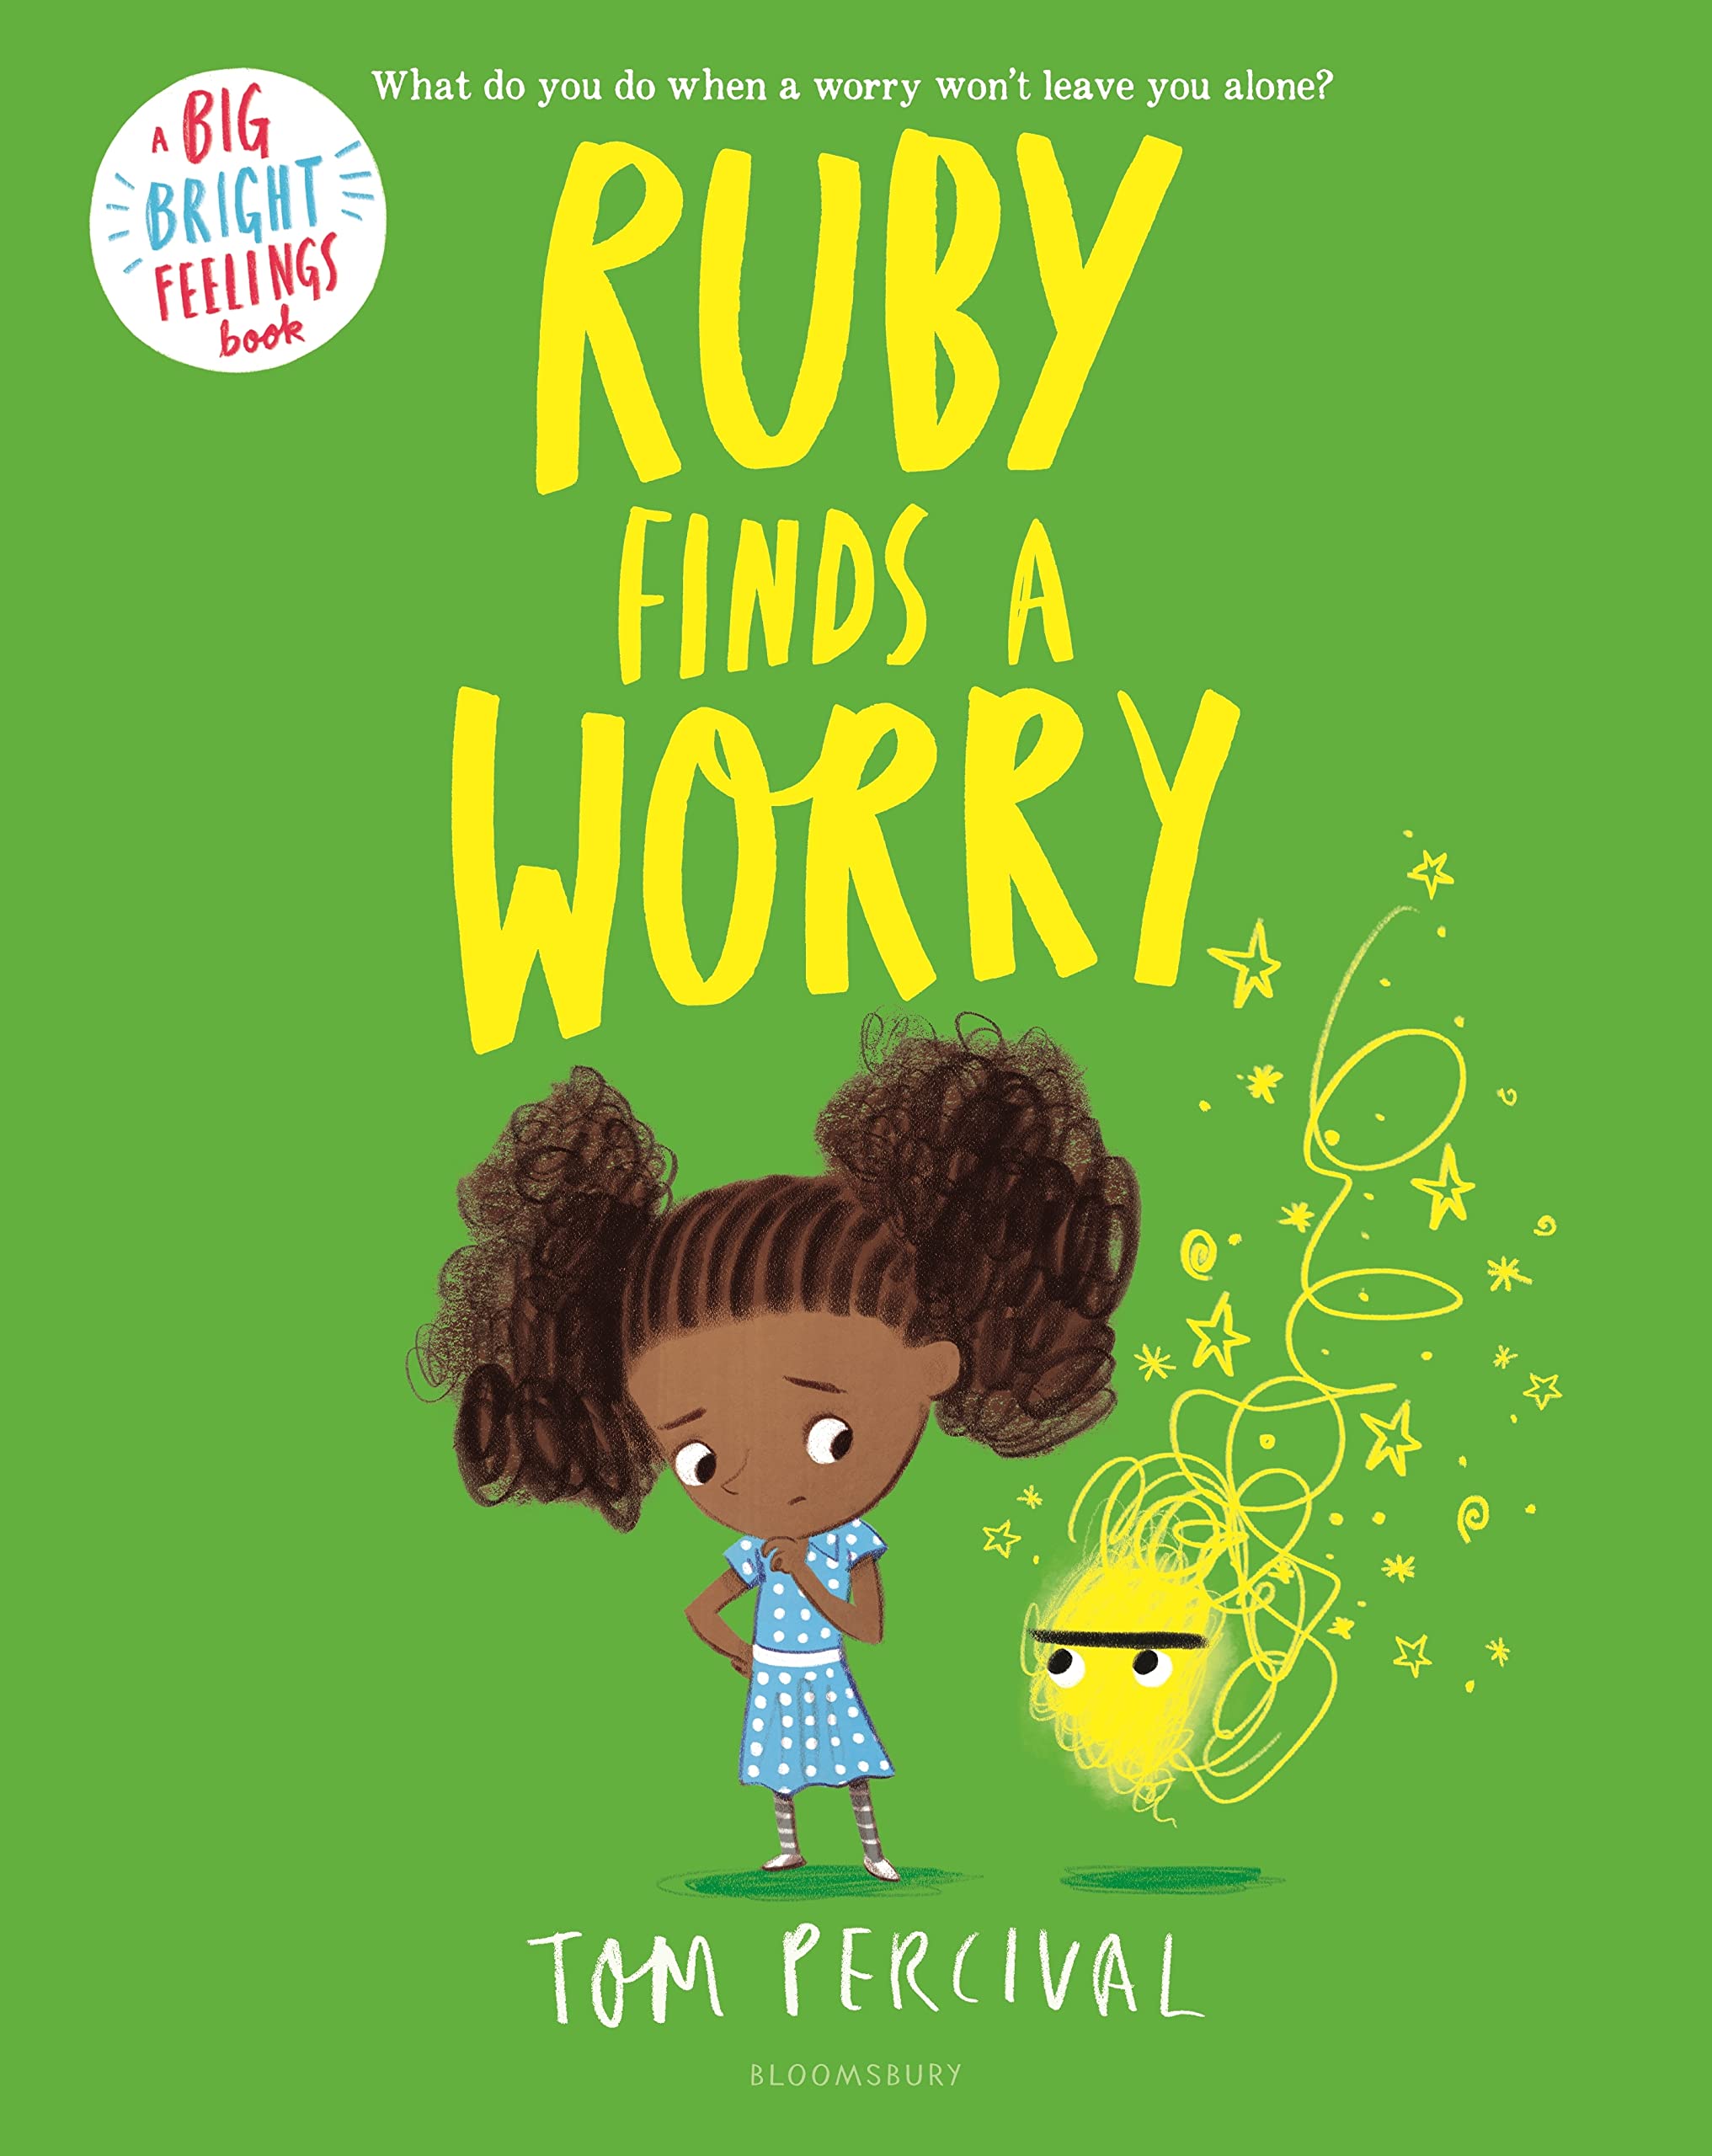 Book's cover with young girl with a yellow scribble that represents her worries.